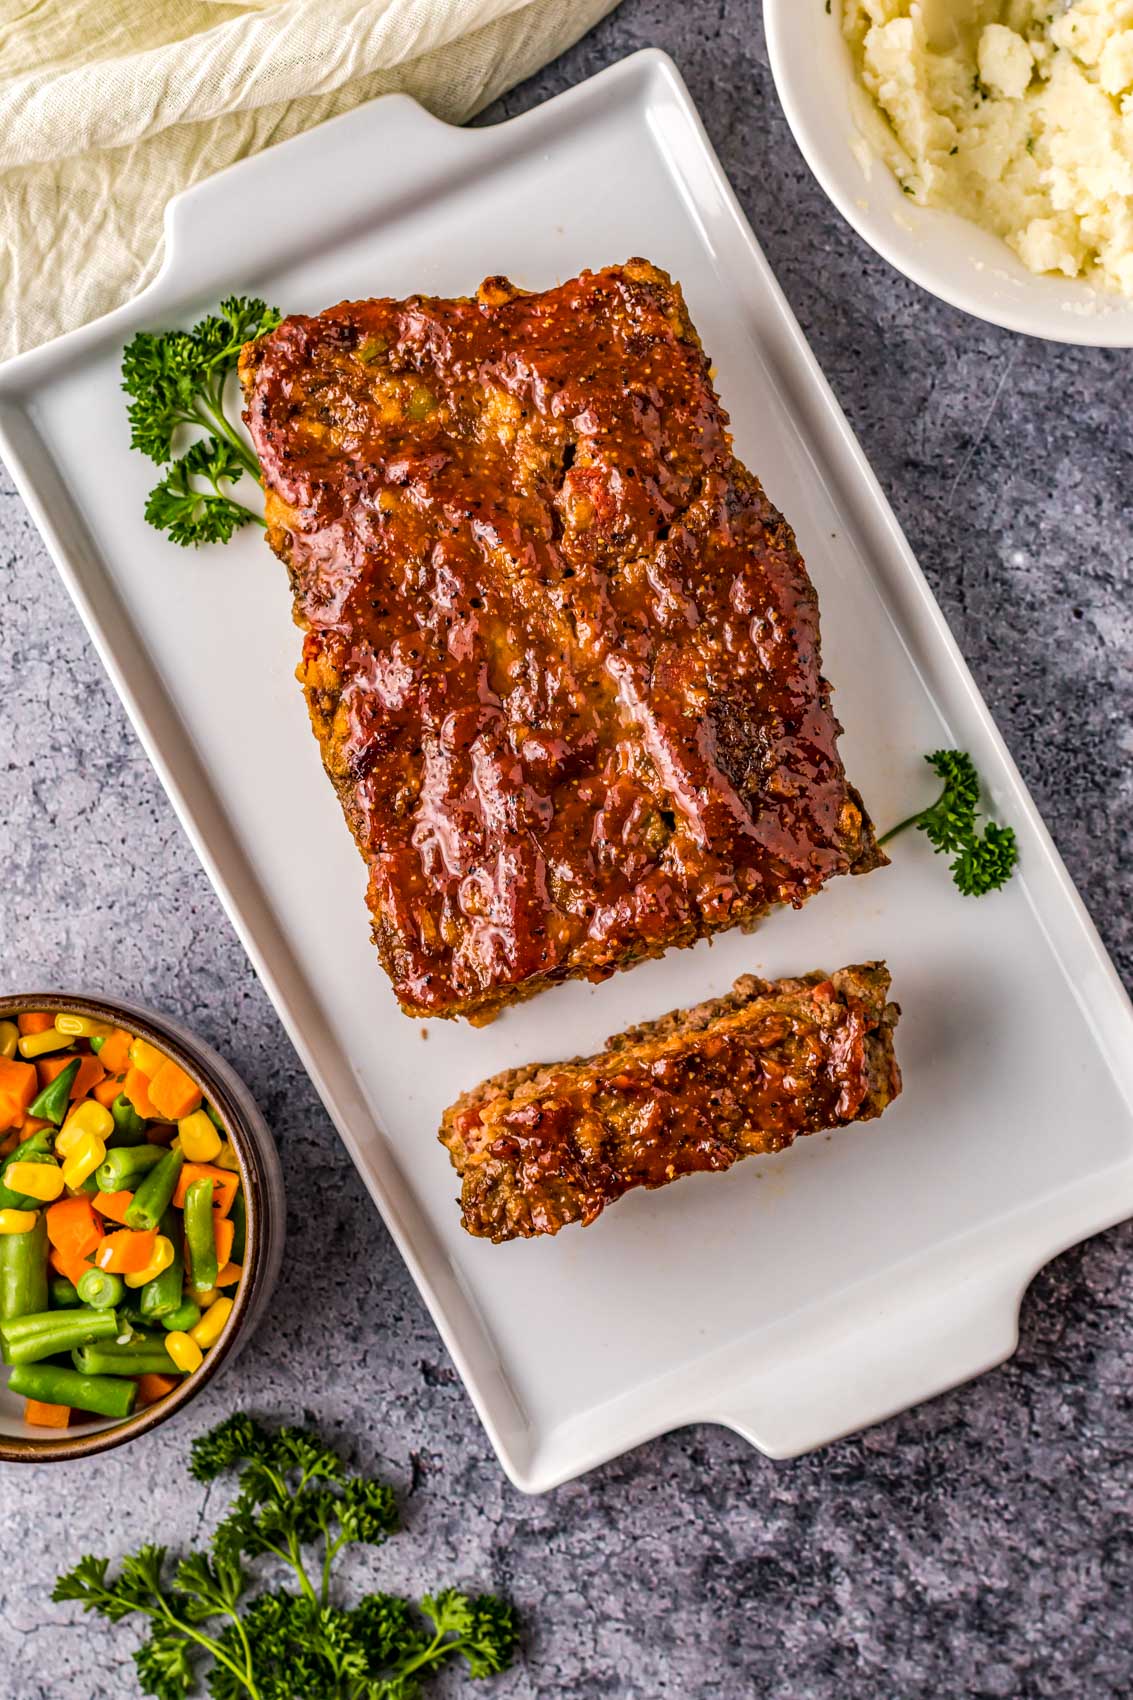 thick, juicy meatloaf on a platter with parsley and veggies